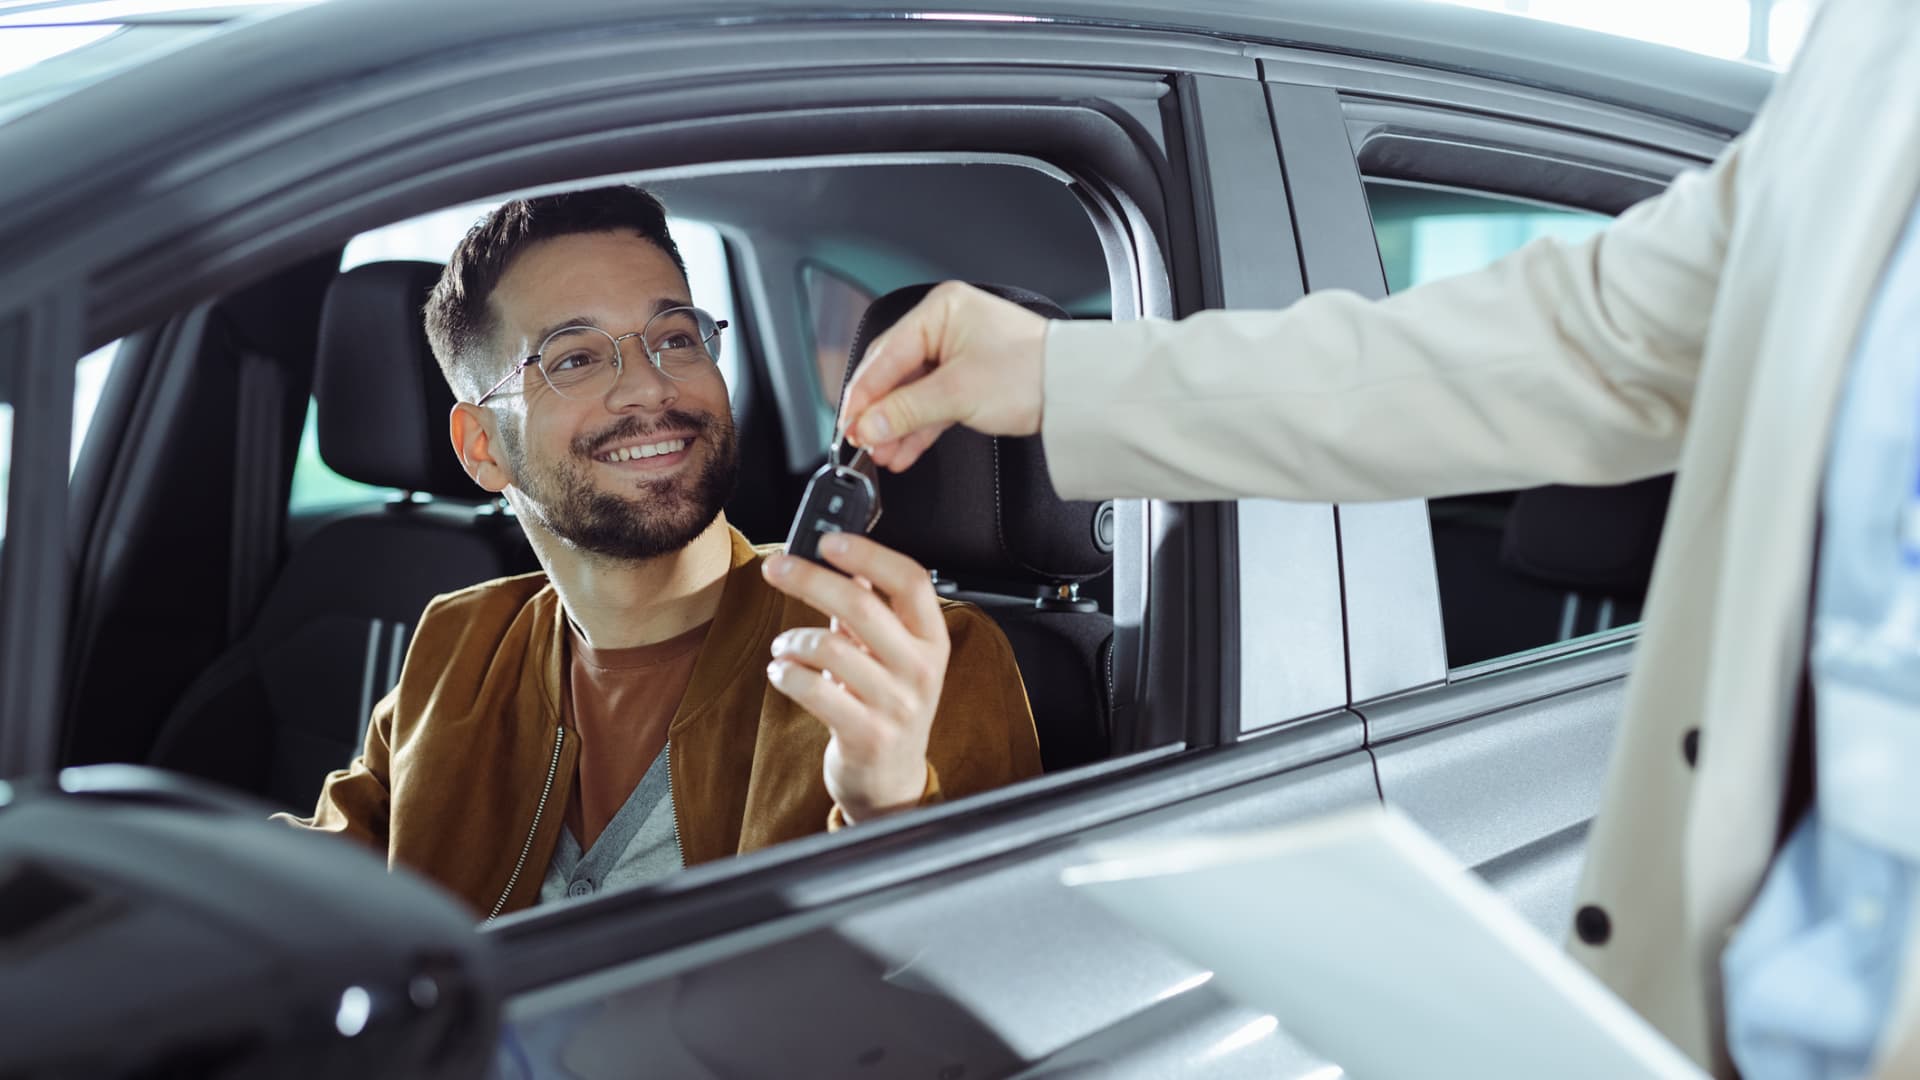 The 'biggest mistake' buyers make when negotiating a car purchase, according to a former broker